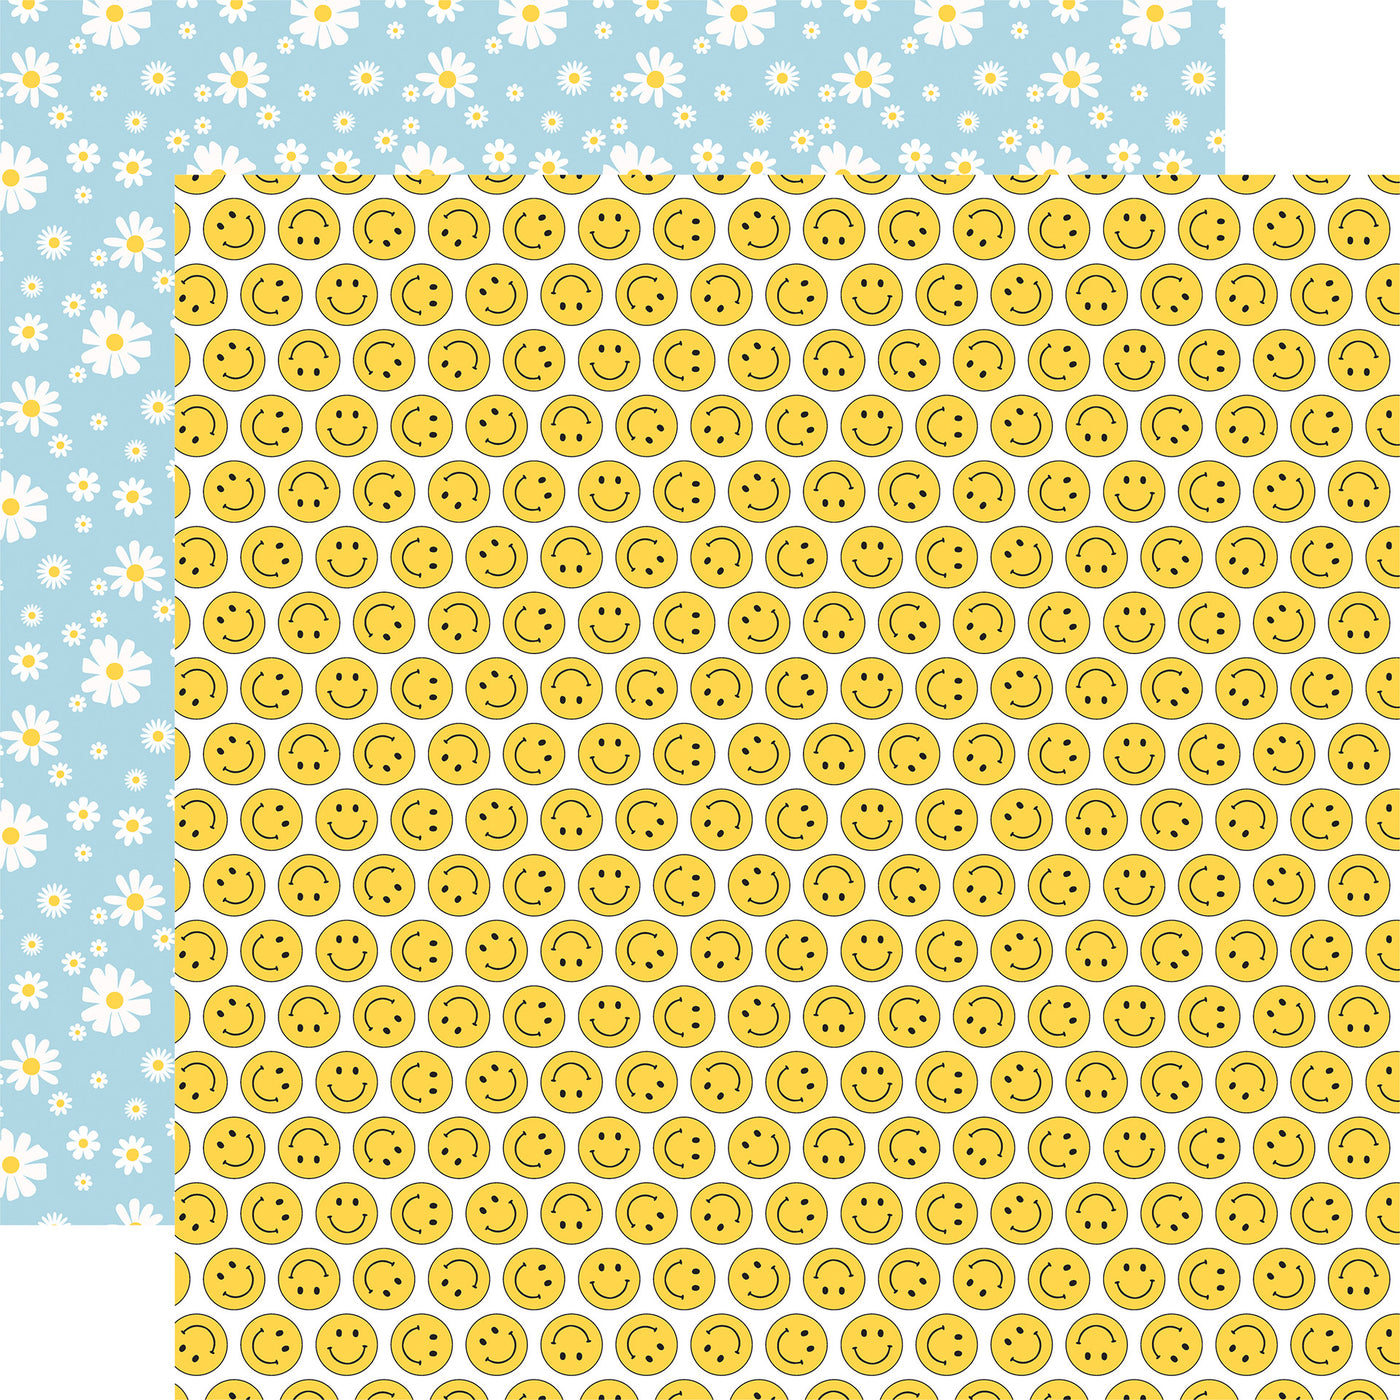 From Echo Park Paper, 12x12 double-sided patterned paper - (rows of bright yellow smiley faces with a white floral daisy pattern on a sky blue background reverse).